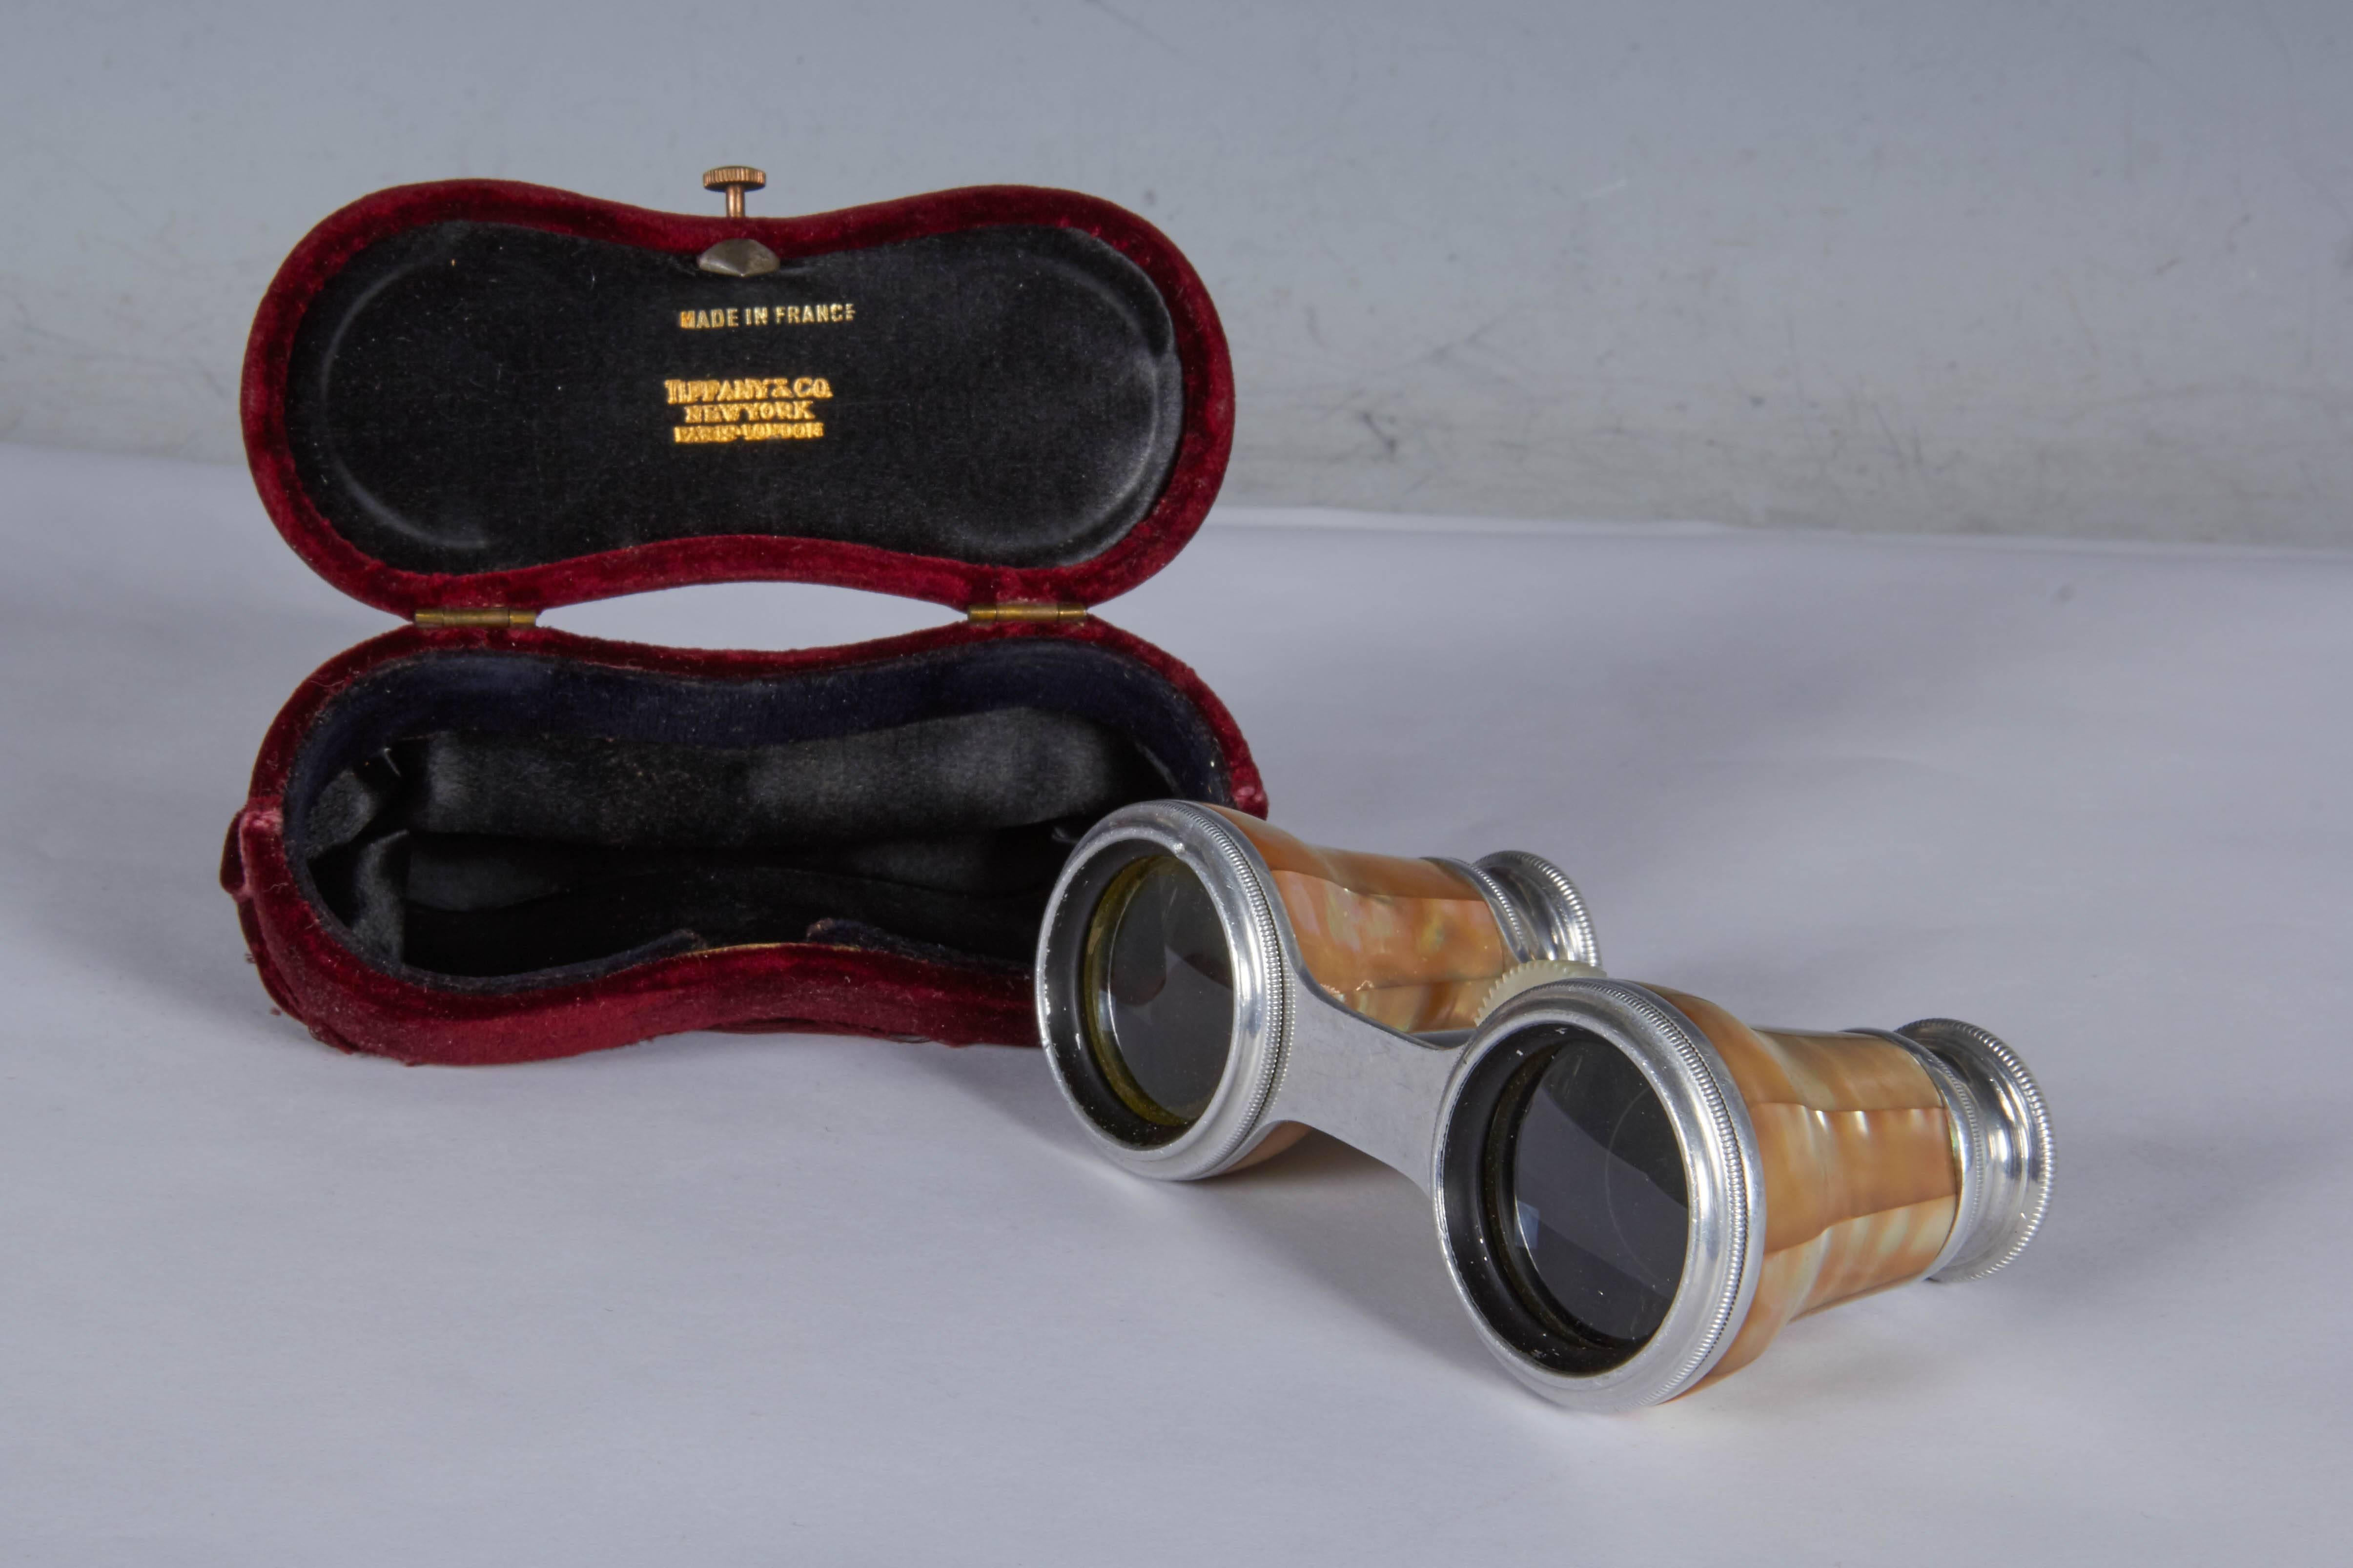 A pair of Tiffany opera glasses produced in France, circa 1870s, the binoculars in metal and veneered with mother-of-pearl, including red velvet case with braided rope handle and clasp. Markings include engravings [Maison de L'Ing Chevallier Optn/